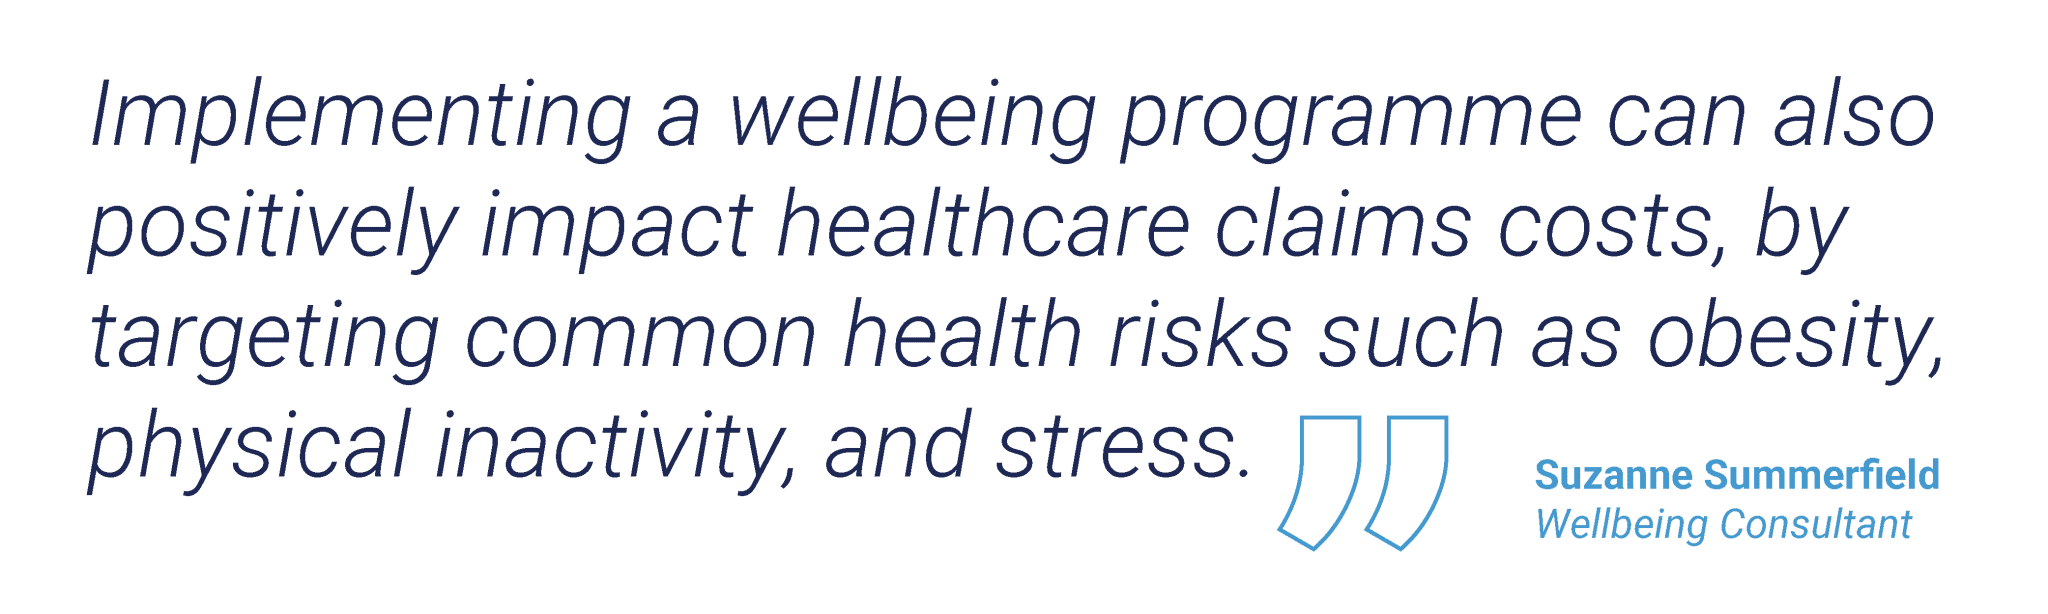 Implementing a wellbeing programme can also positively impact healthcare claims costs, by targeting common health risks such as obesity, physical inactivity, and stress. -Suzanne Summerfield Wellbeing Consultant